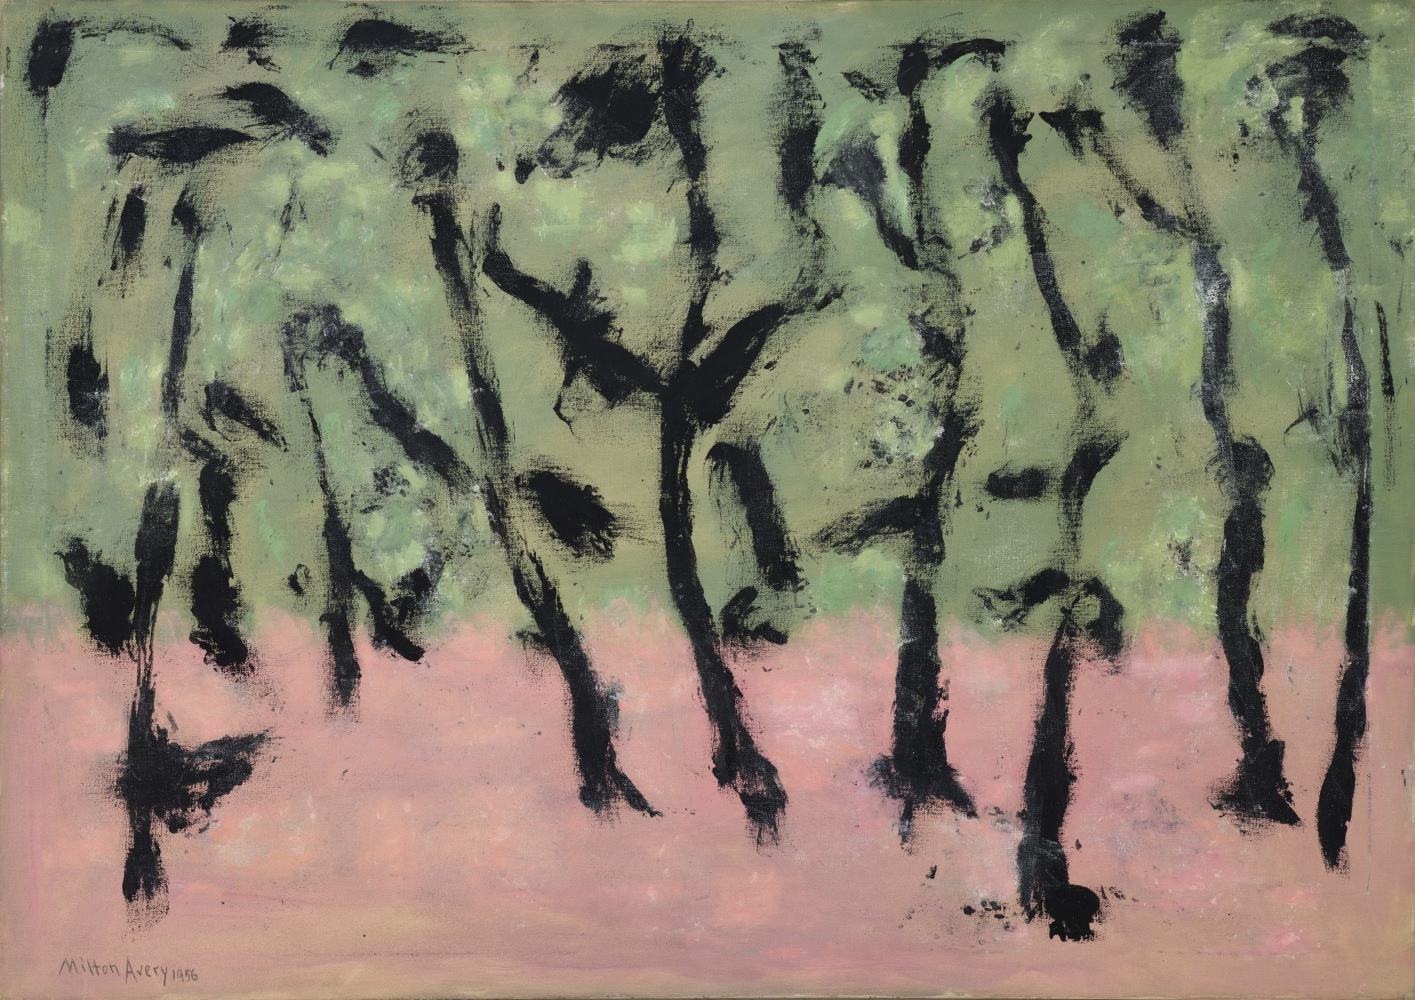 MILTON AVERY (1885-1965)

Dancing Trees

1956

Oil on canvas

34 x 48 inches

86.4 x 121.9cm